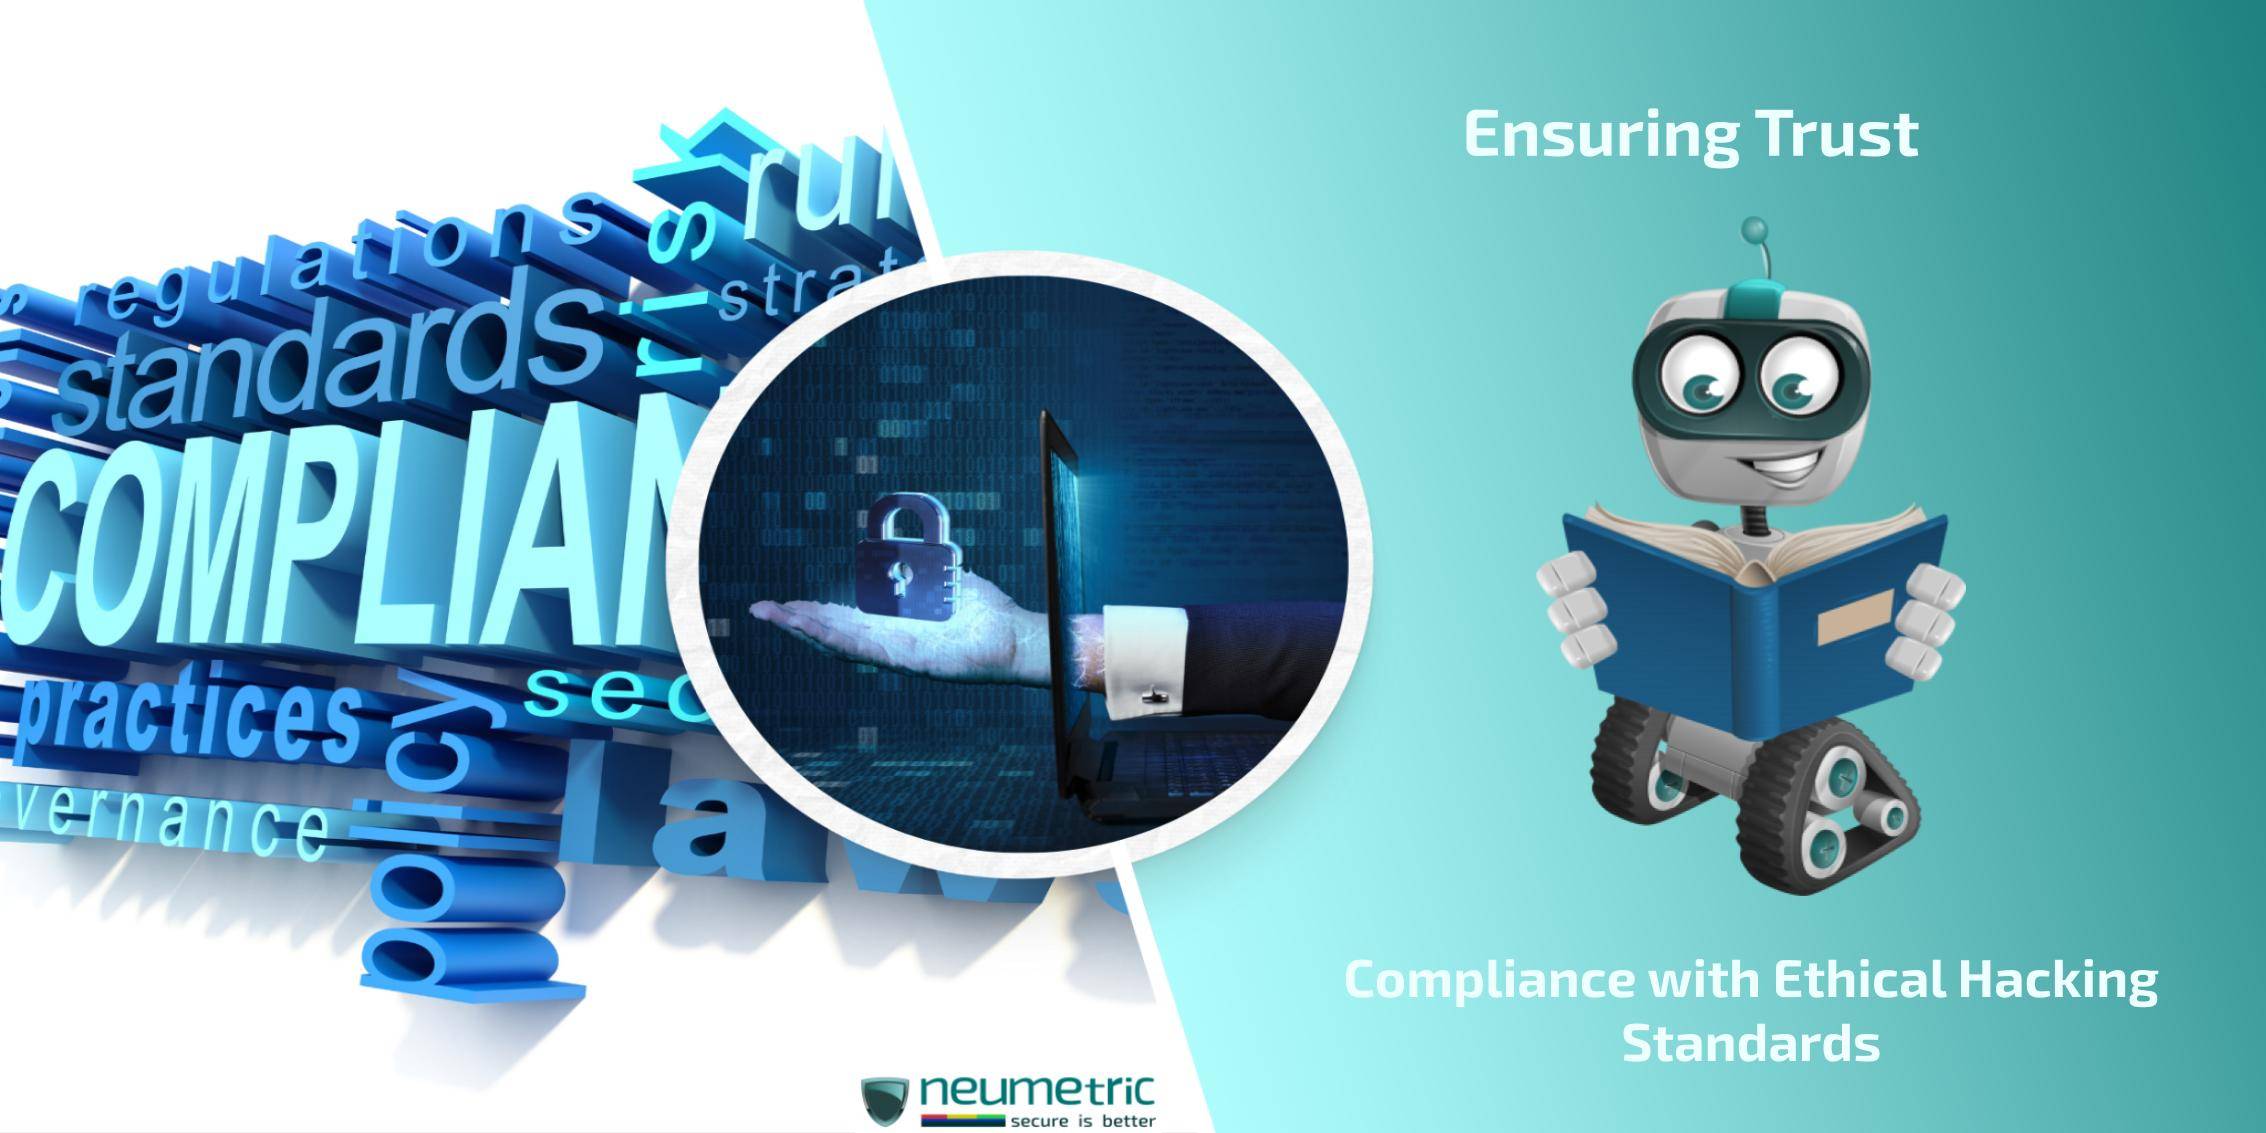 Ensuring Trust: Compliance with Ethical Hacking Standards